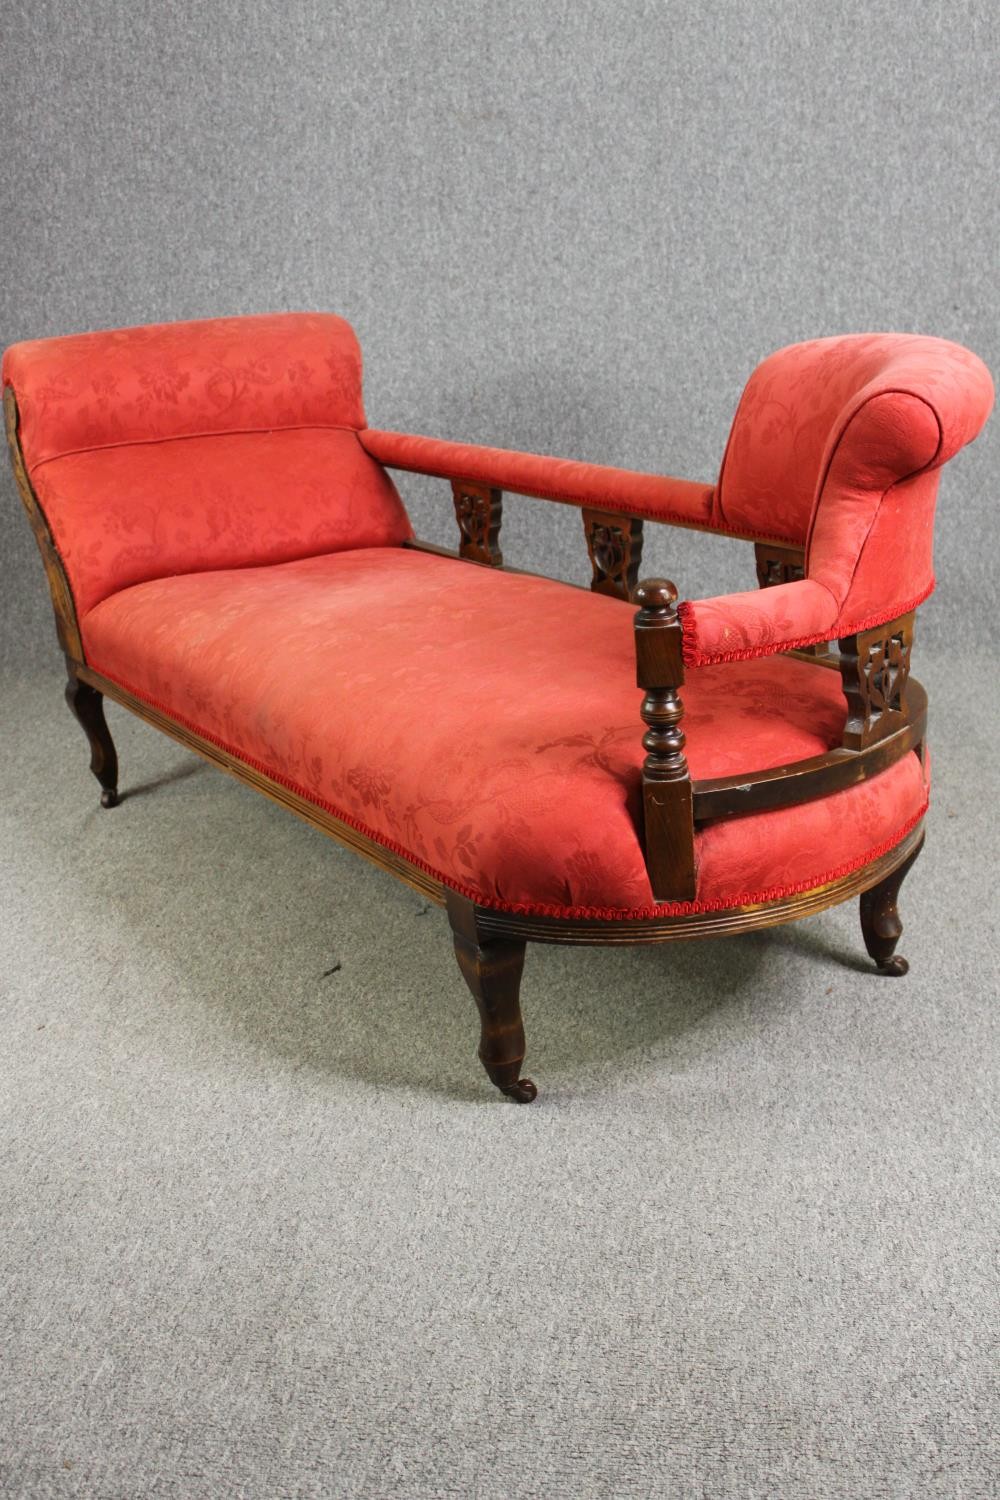 A late Victorian carved walnut chaise longue, with red damask upholstery, H.78 W.180 D.53cm. - Image 3 of 7